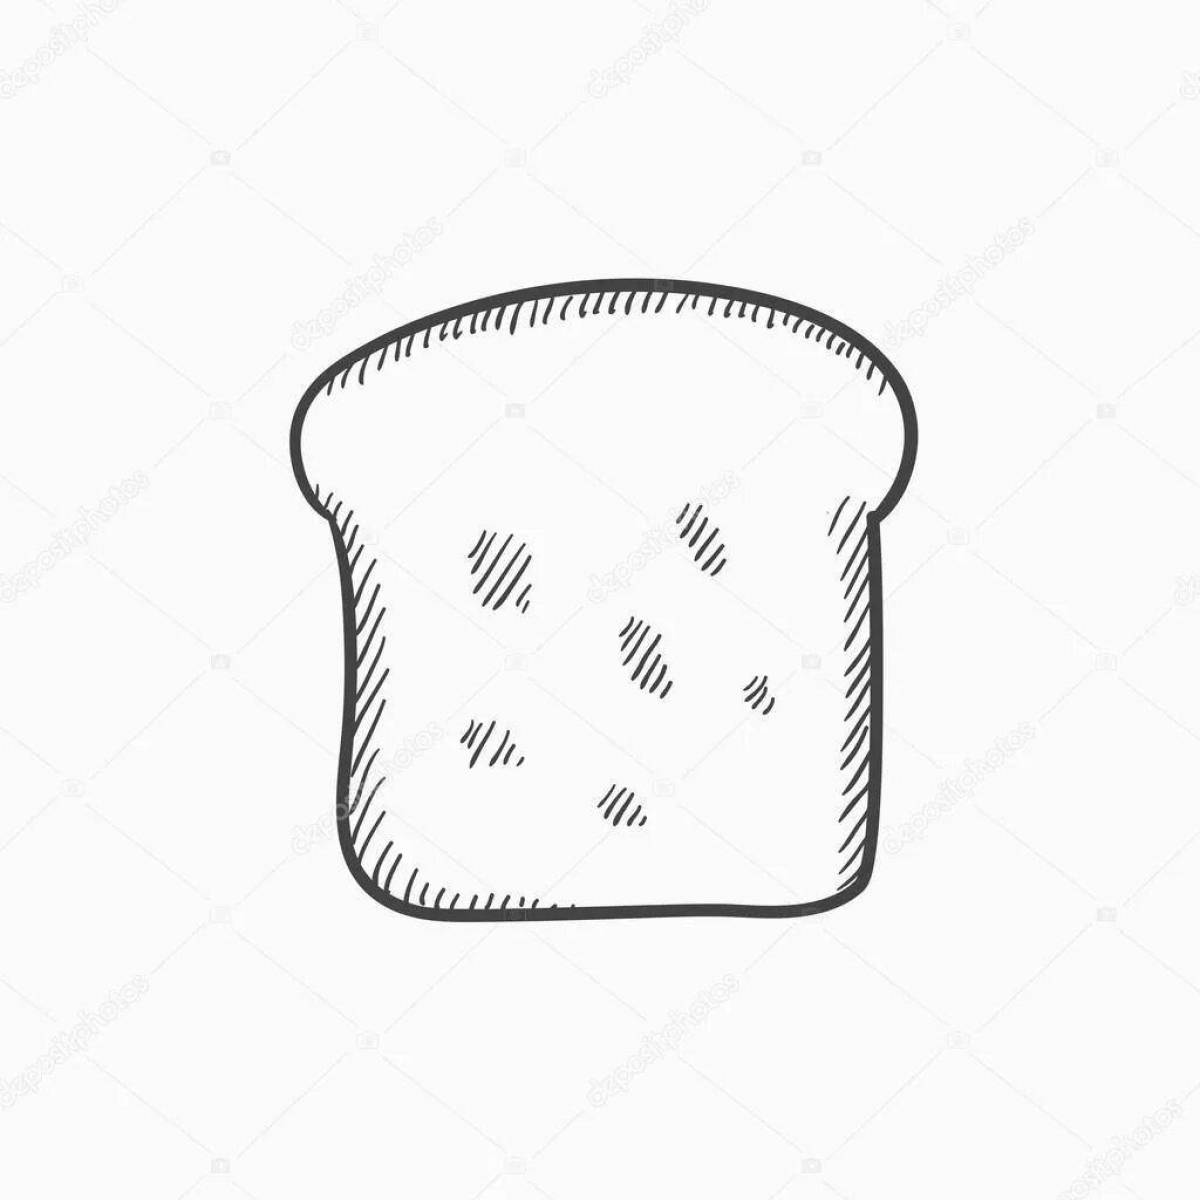 Tempting coloring of a piece of bread